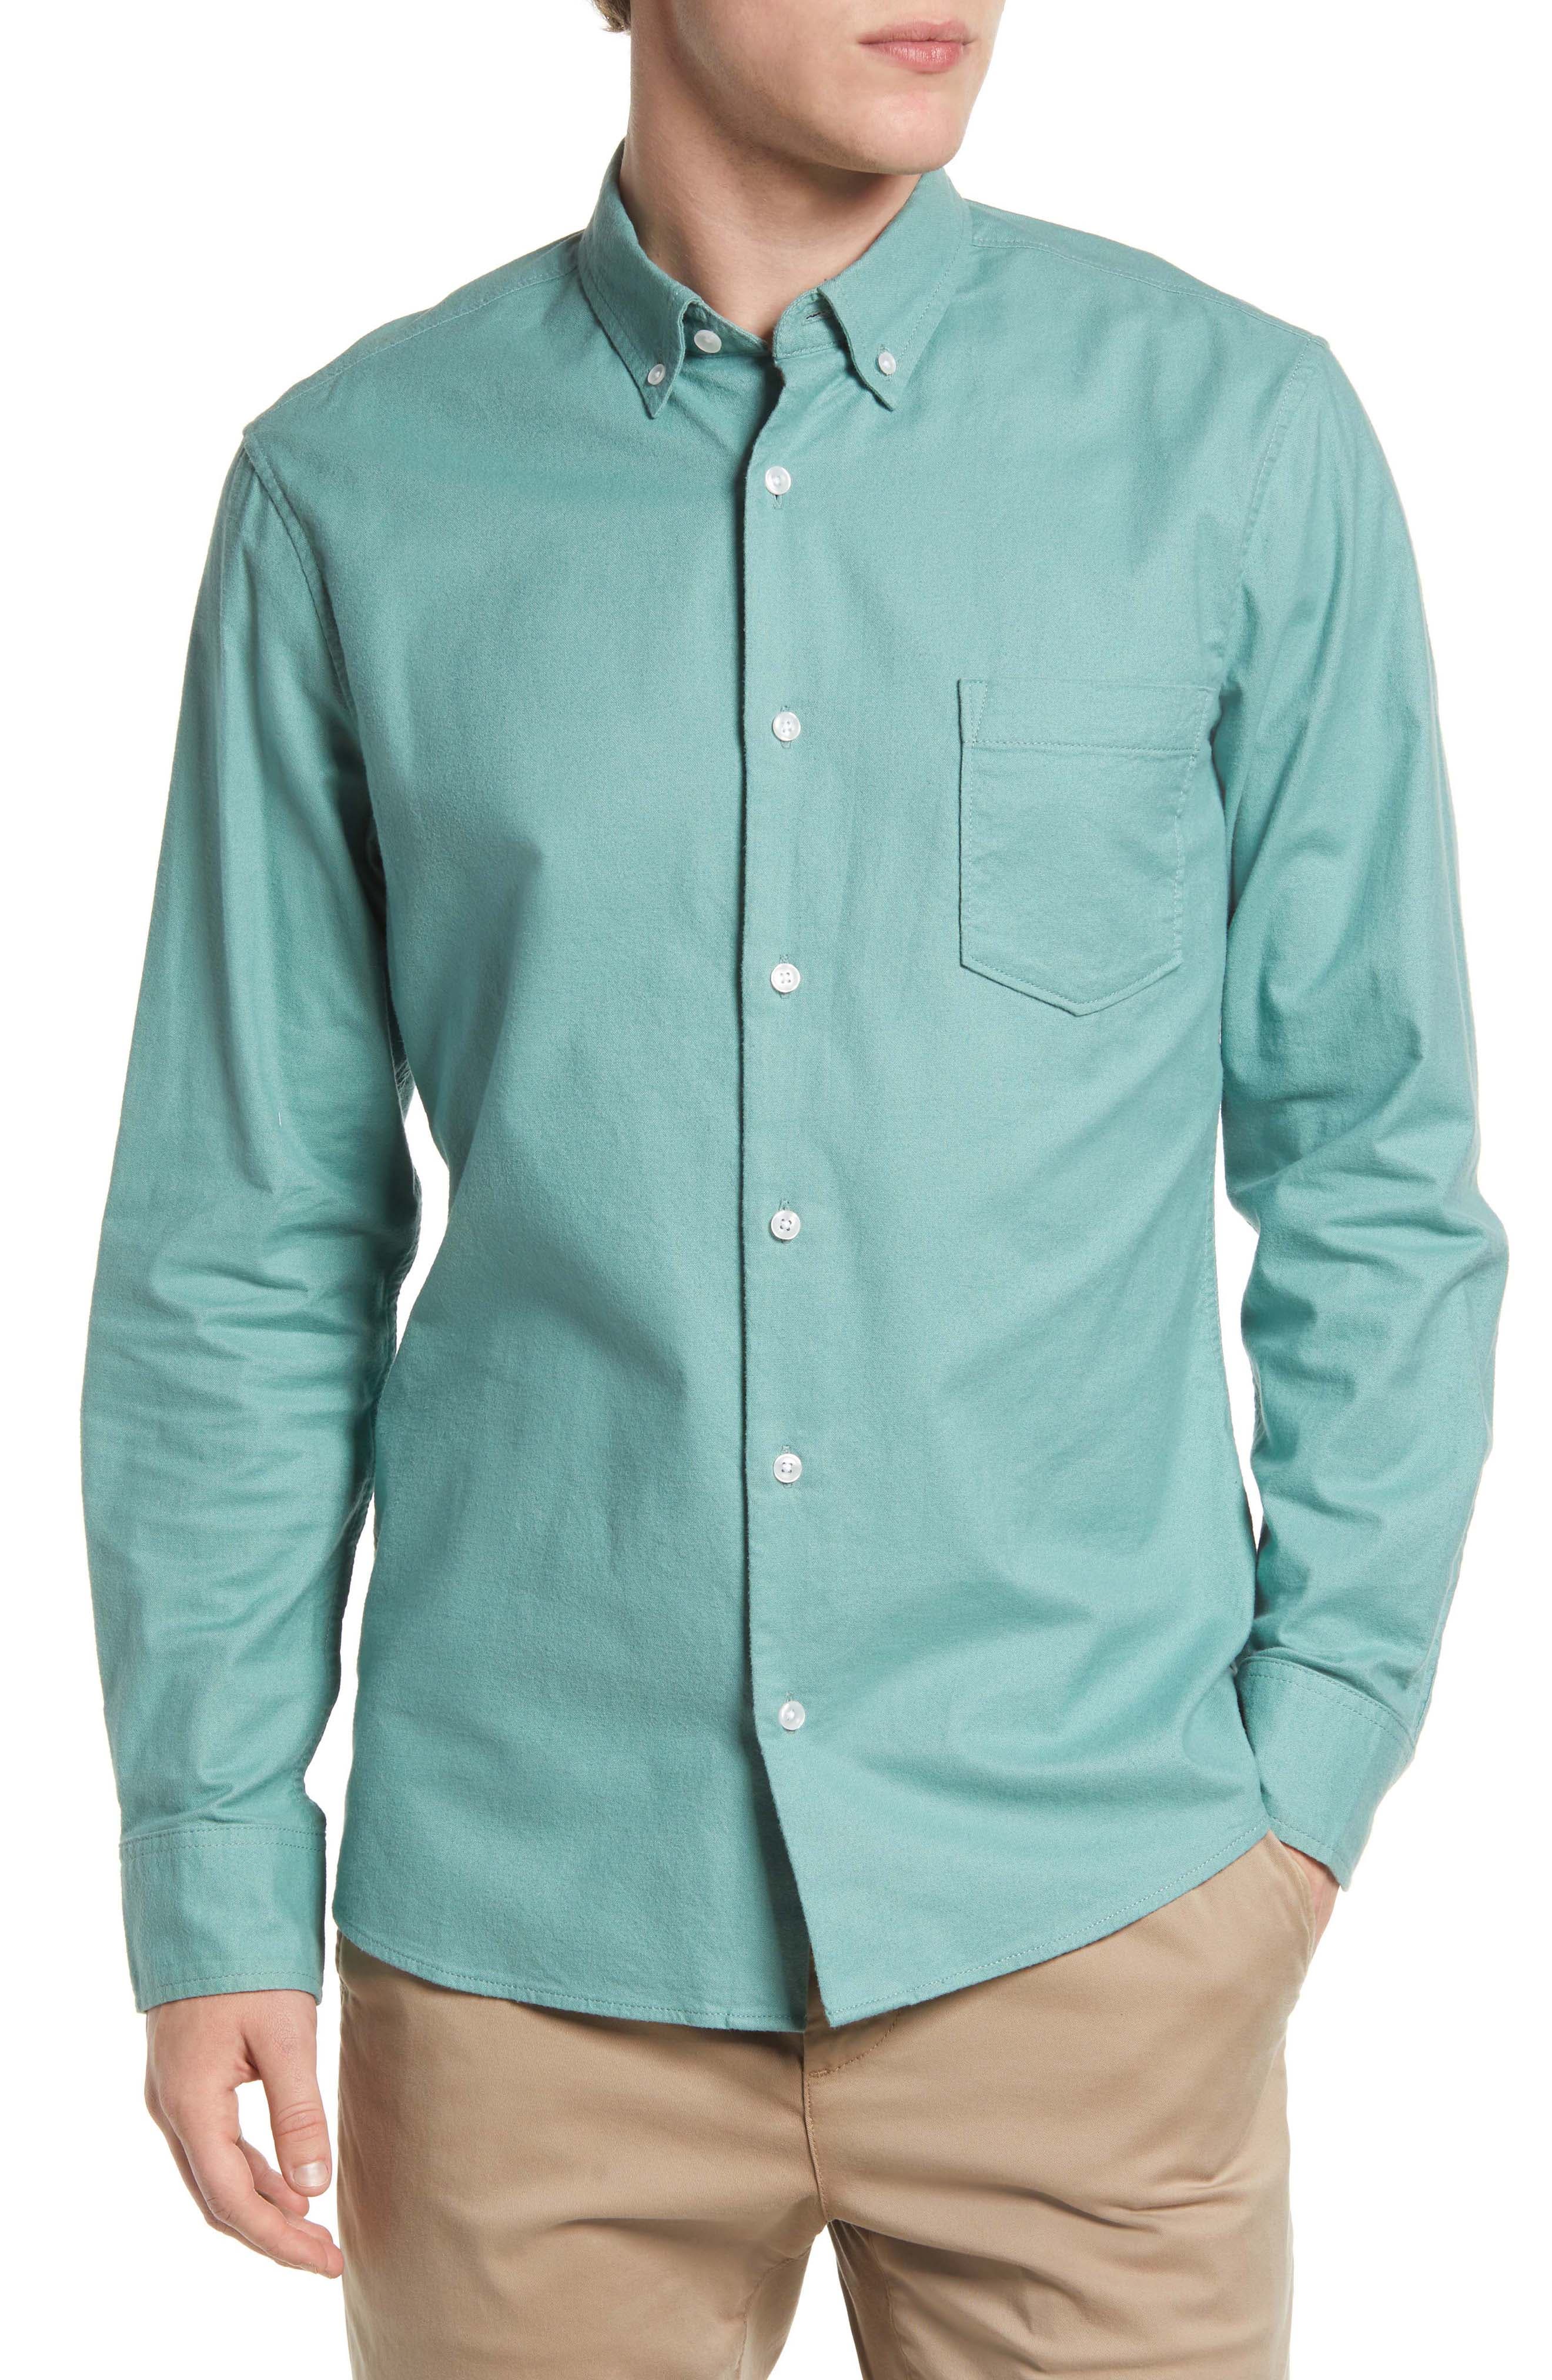 Classic Collar Wool Mix 2 Button Cuff Shirt in a Green Check Twill Cotton 